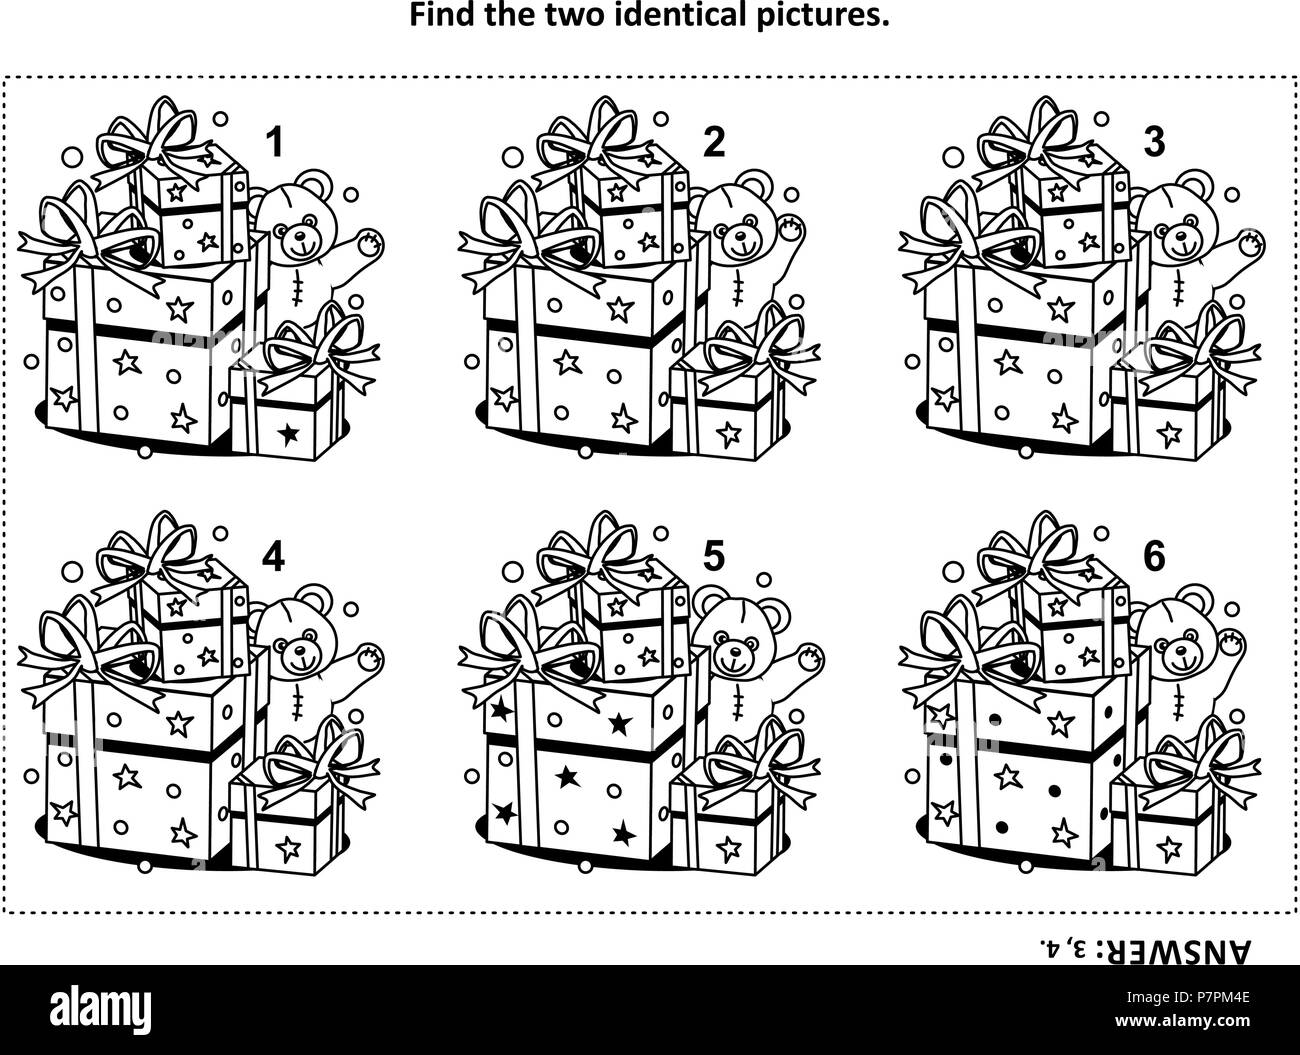 IQ training find the two identical pictures with presents and teddy bear visual puzzle and coloring page. Answer included. Stock Vector